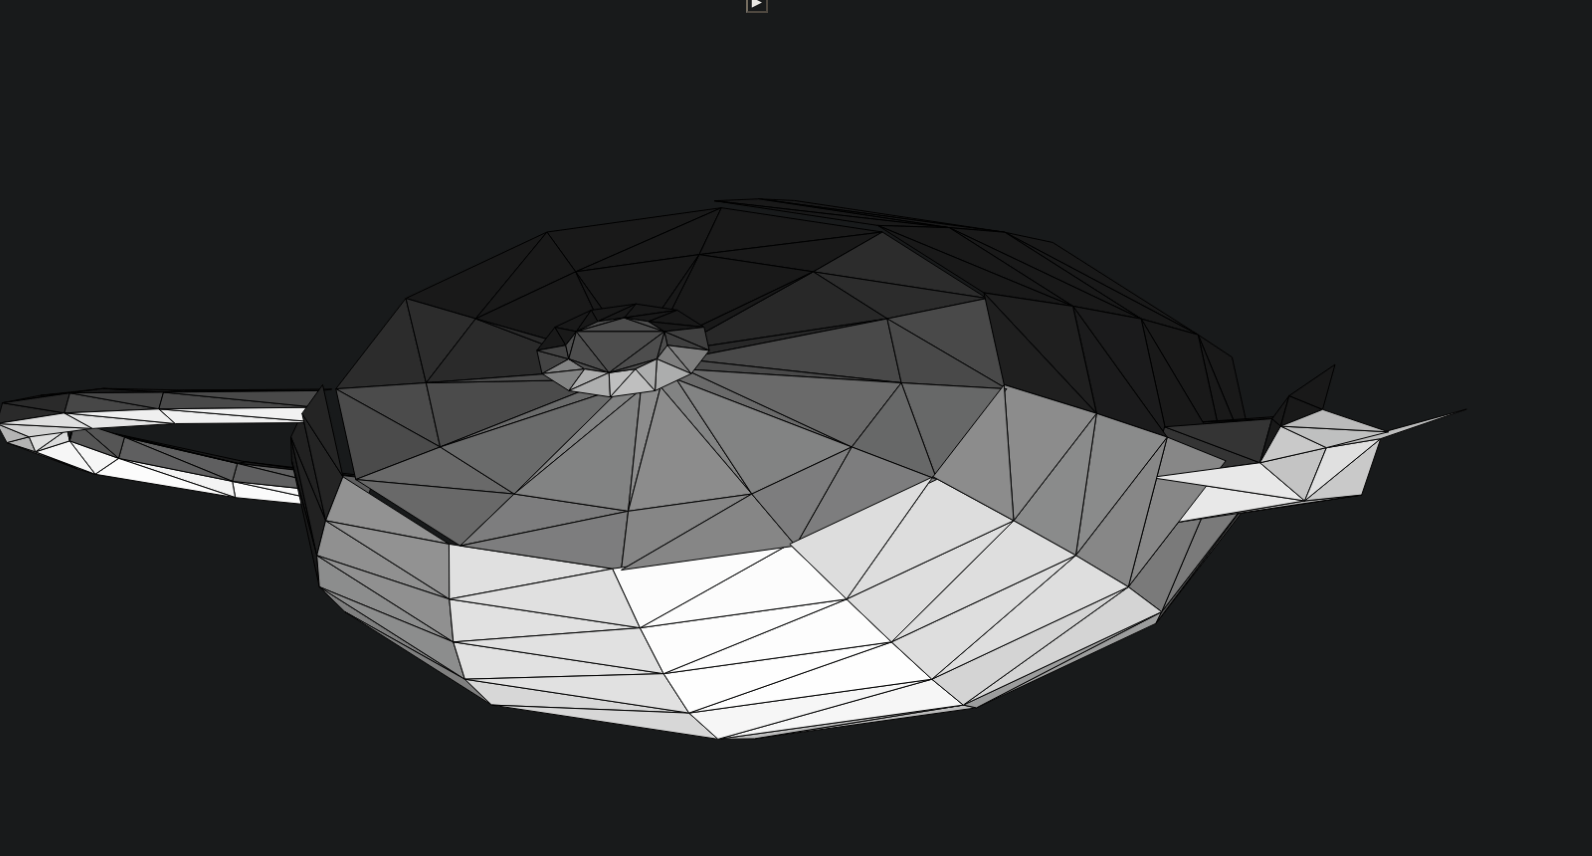 Teapot spinning rendered by this algorithm